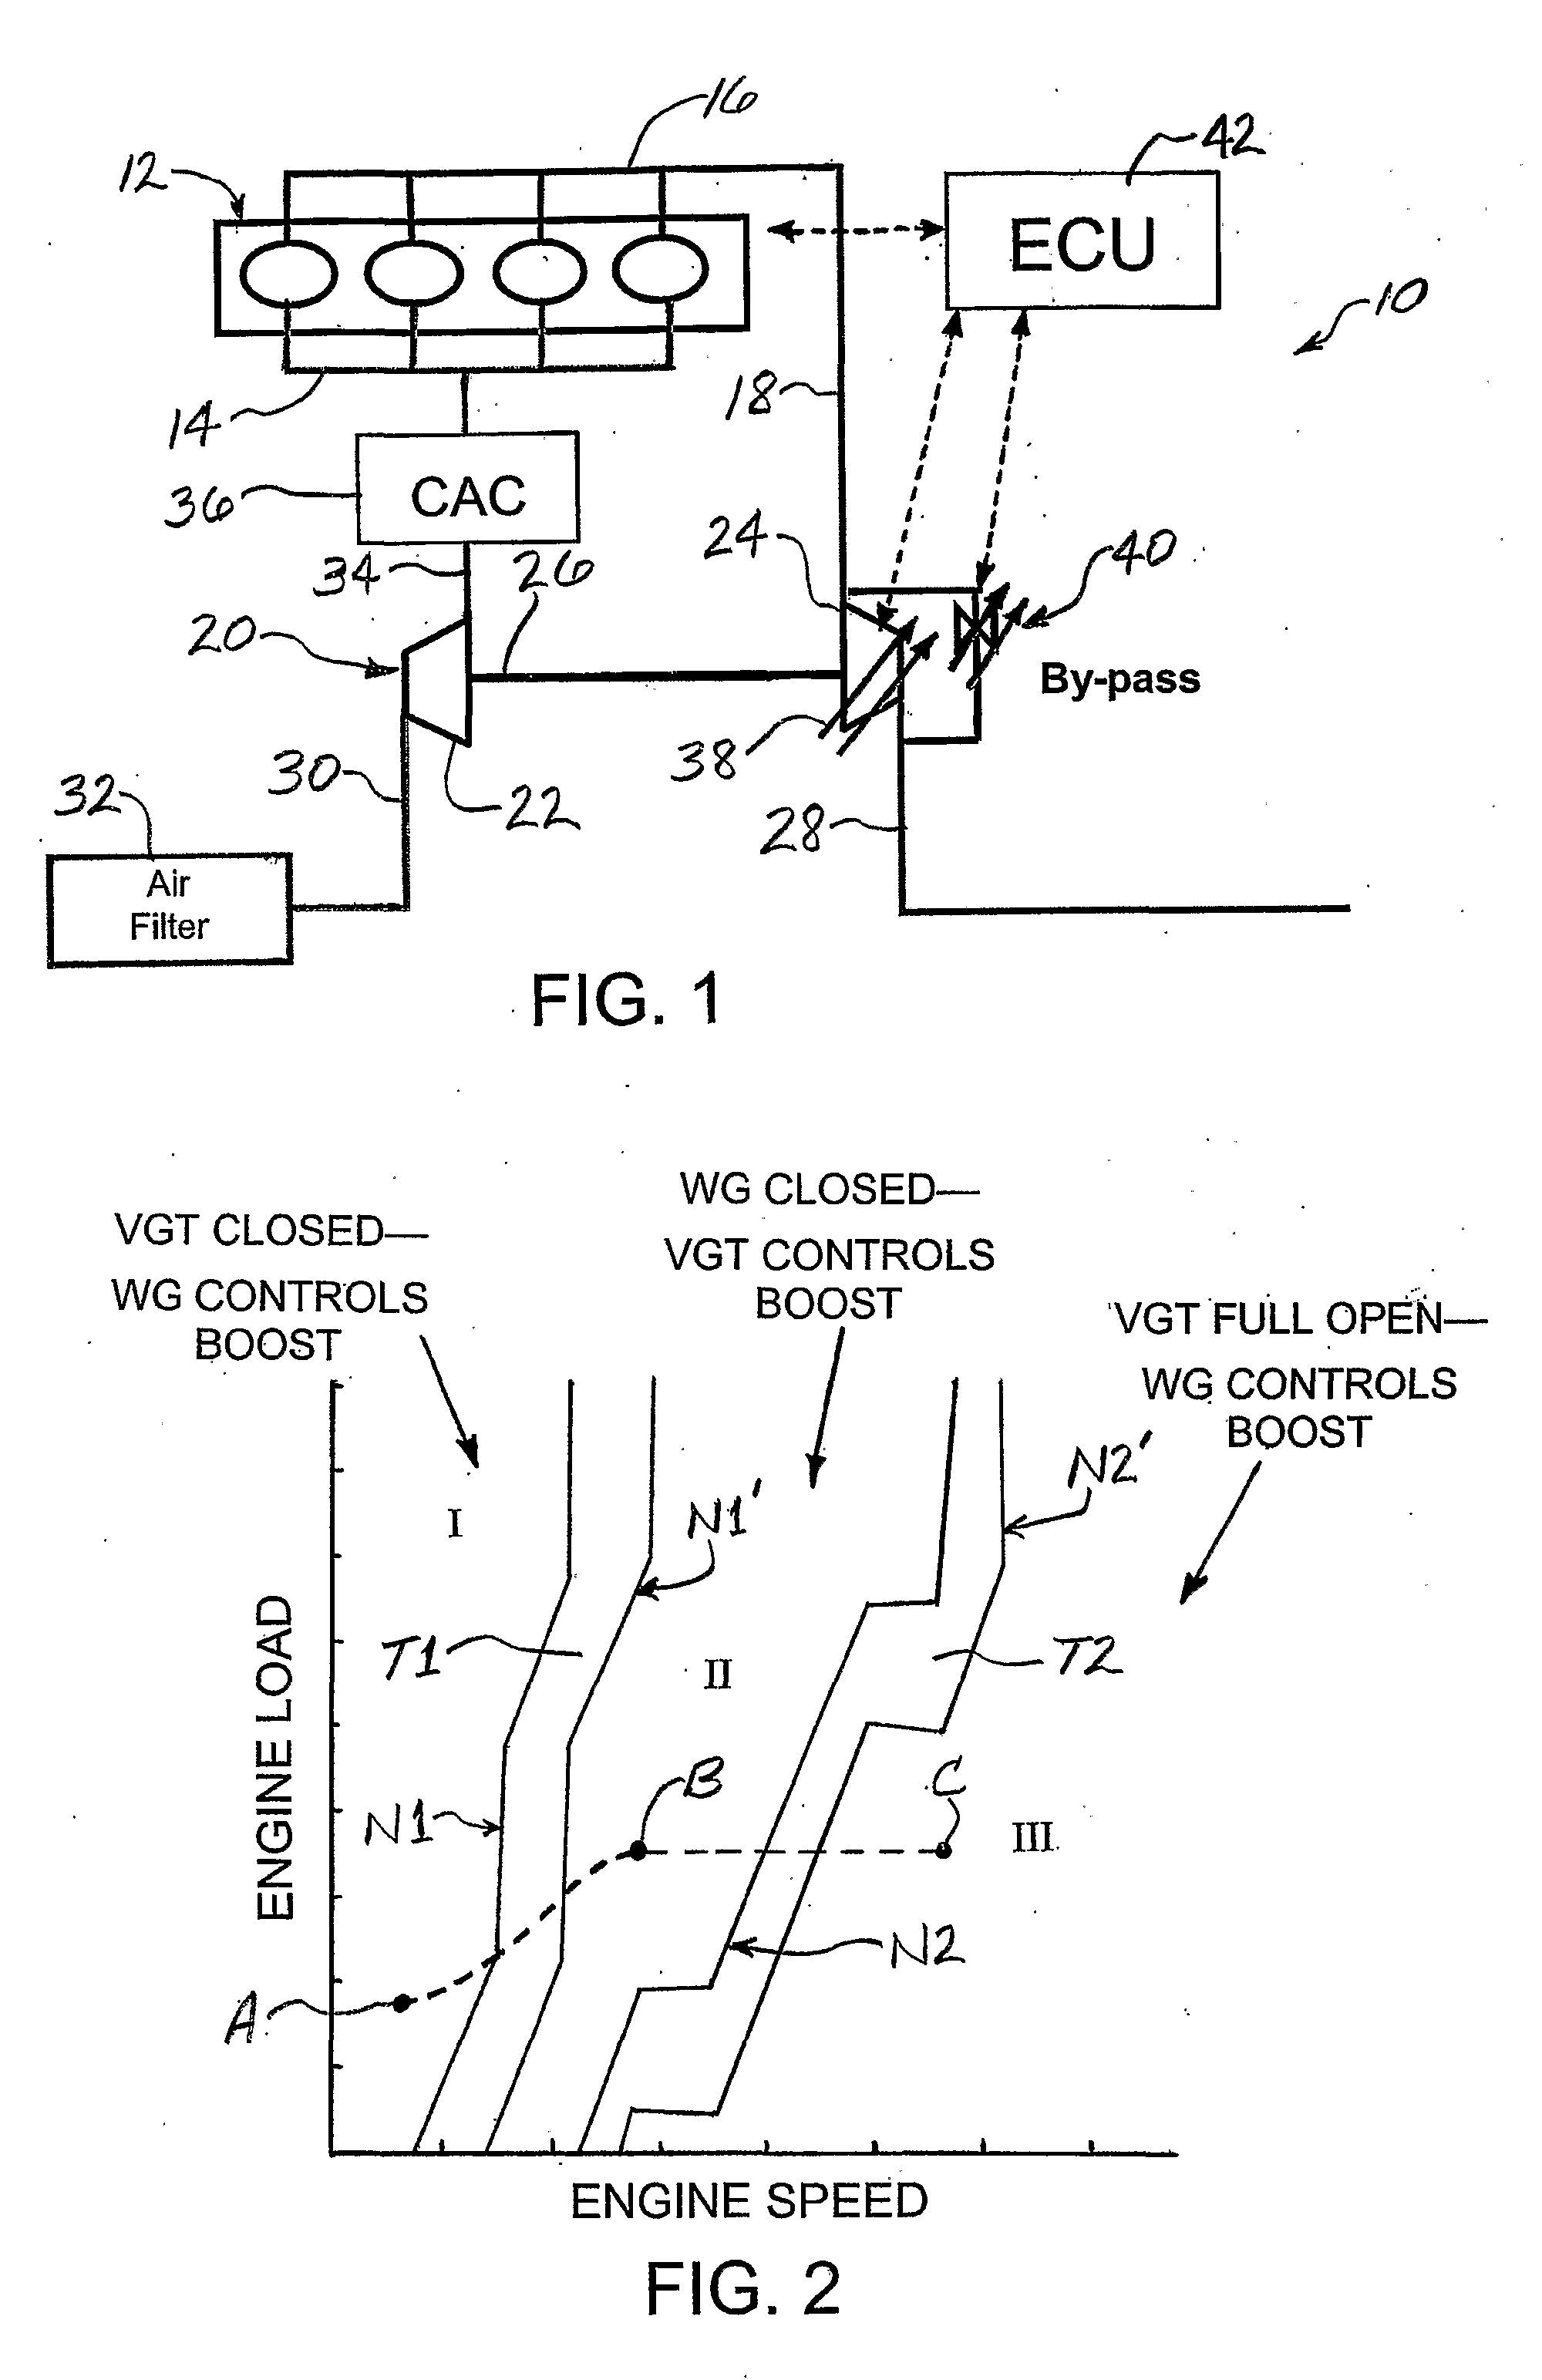 Method of Controlling a Turbocharger Having a Variable-Geometry Mechanism and a Waste Gate